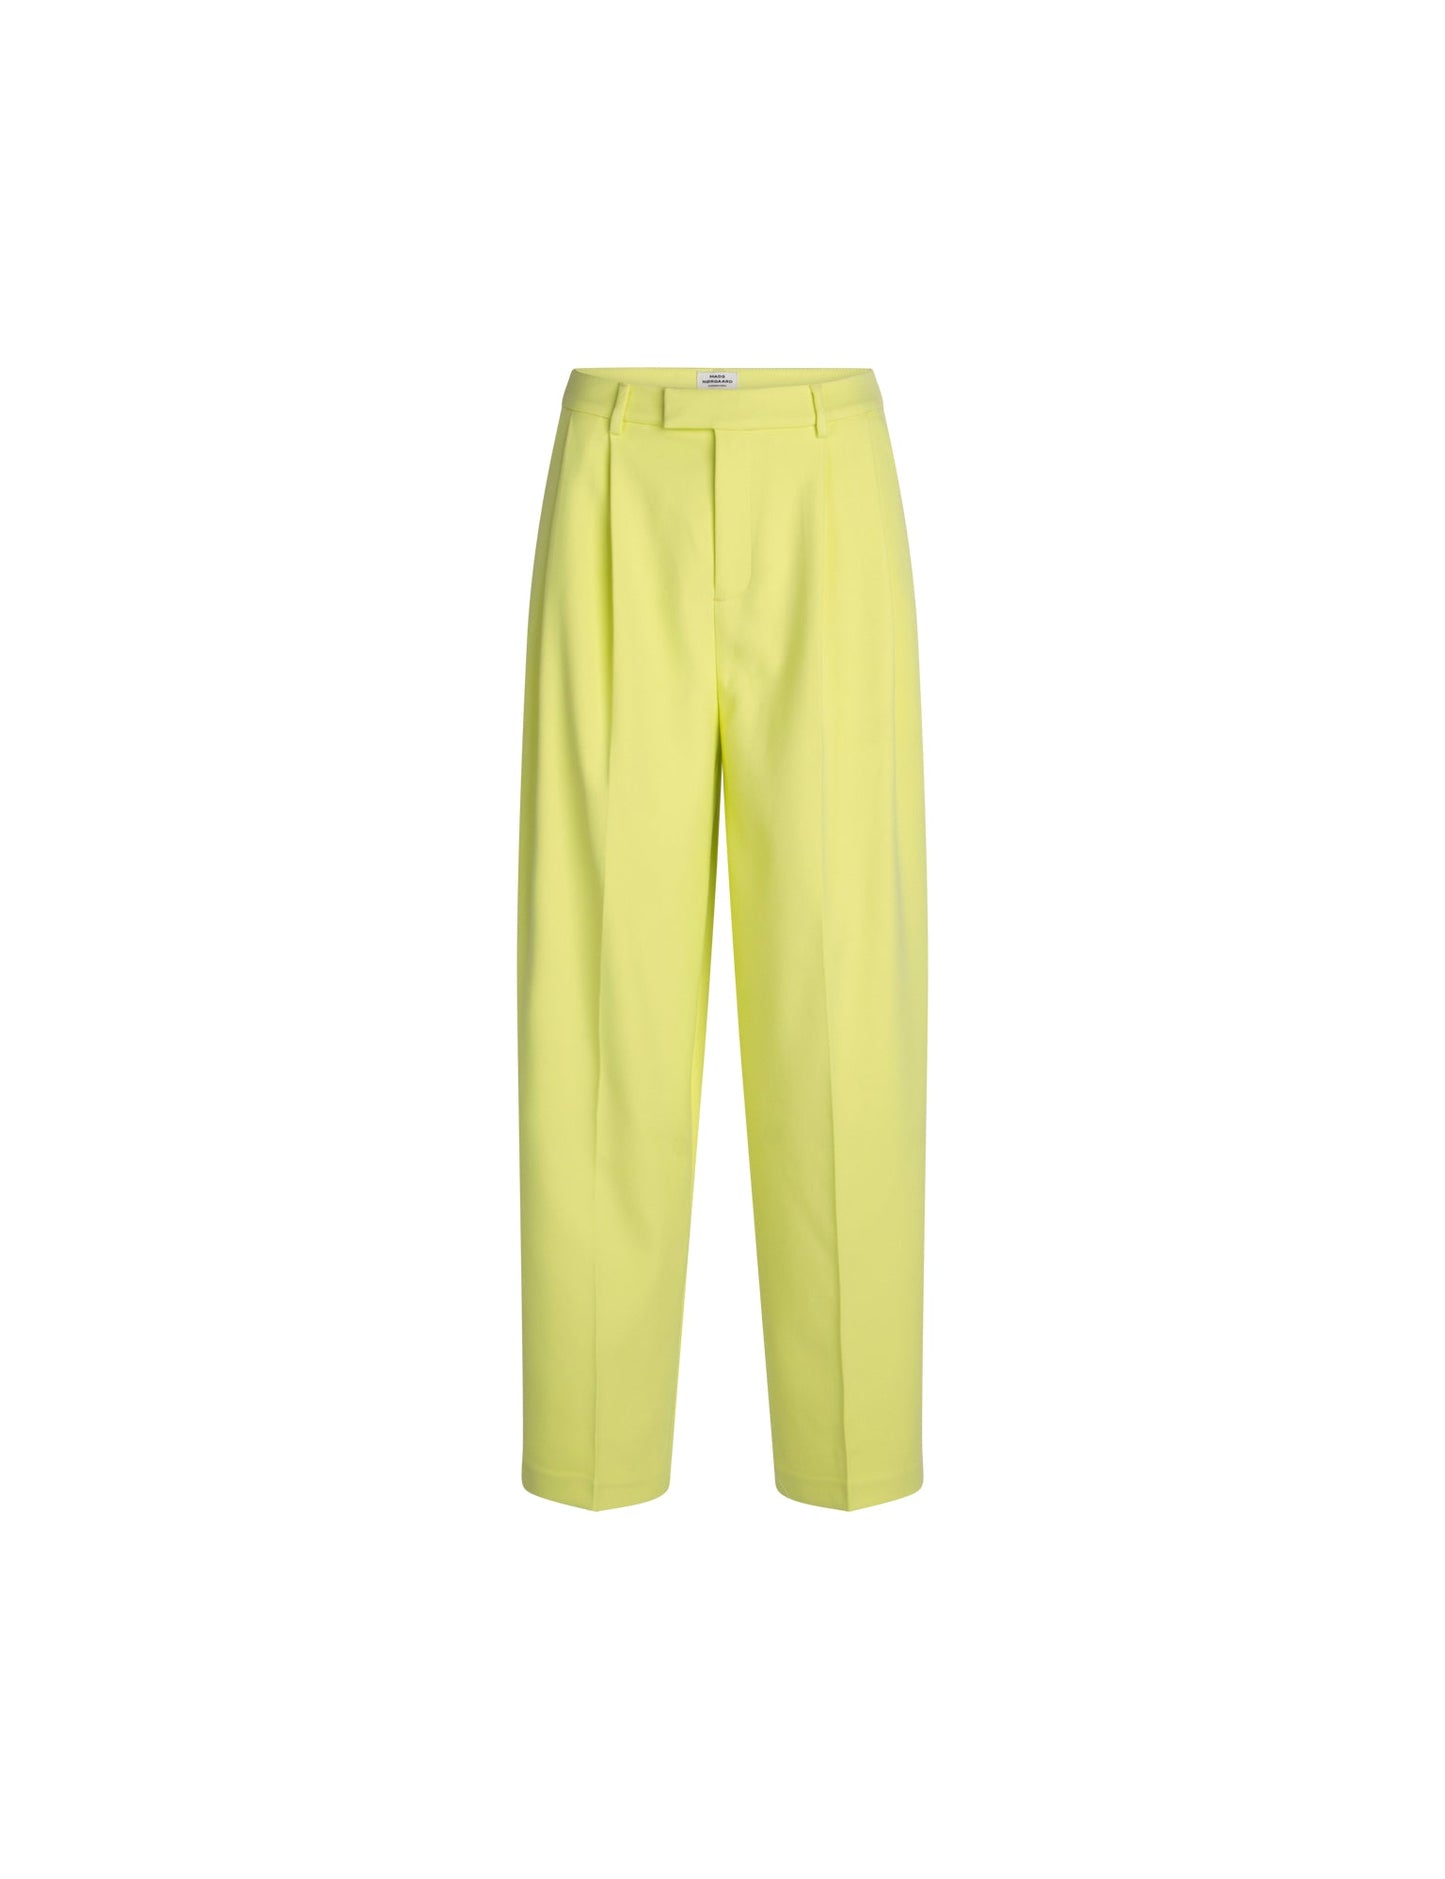 Soft Suiting Paria Pants,  Sunny Lime